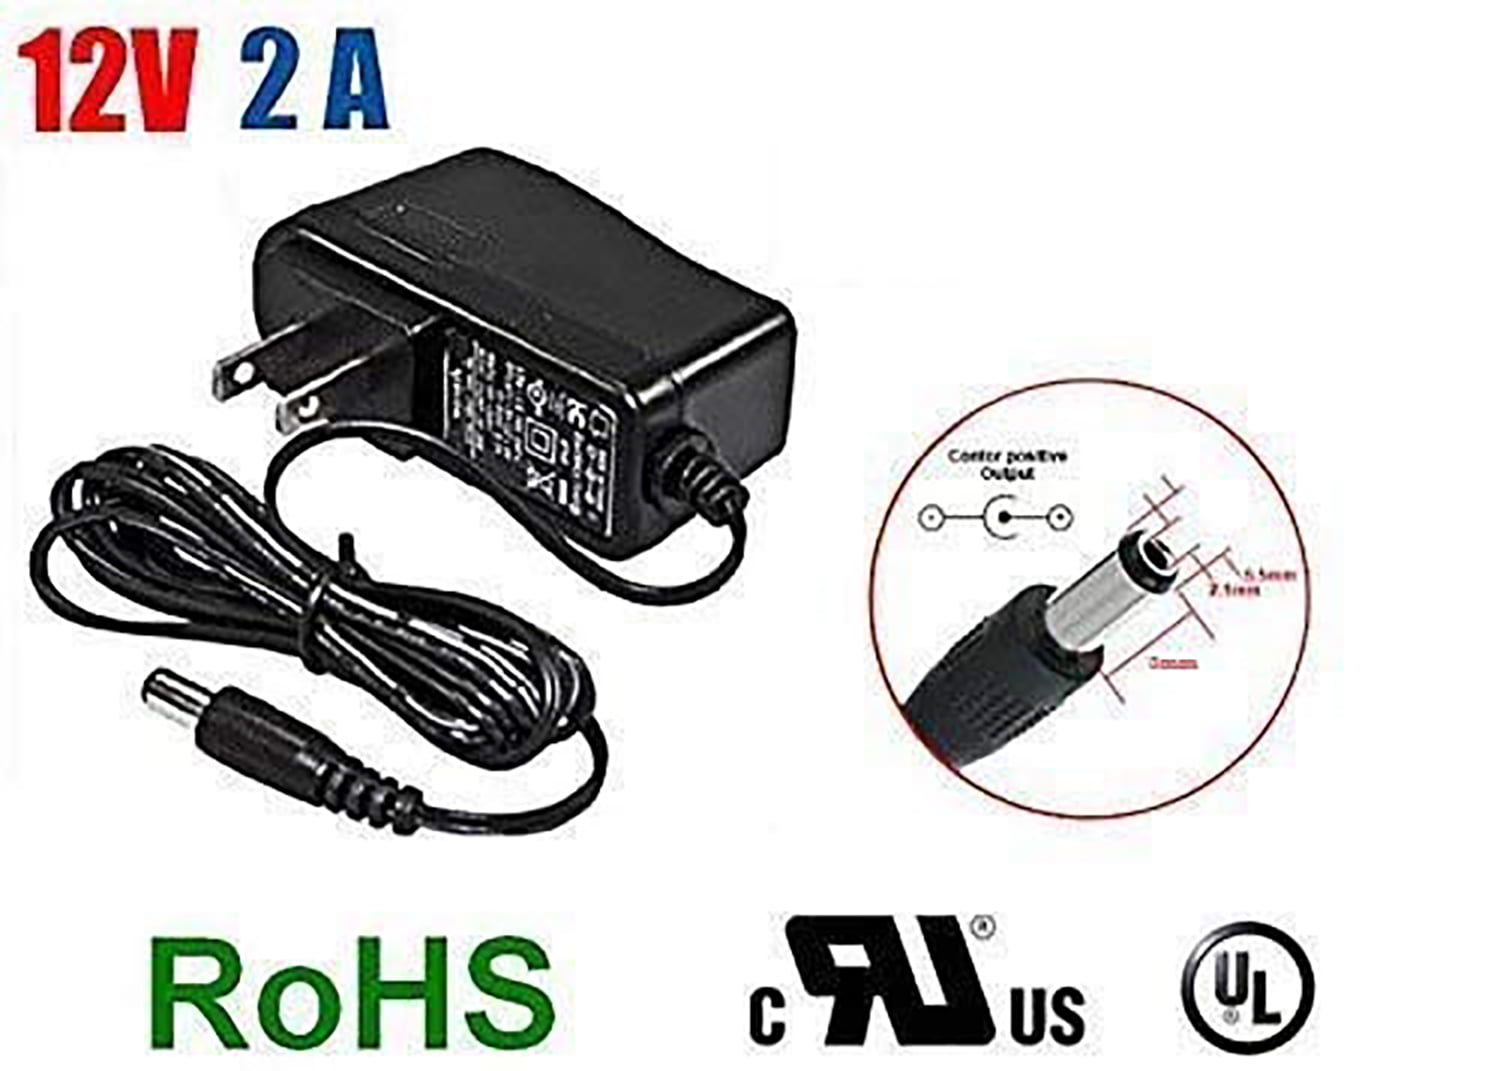 Certified Refurbished ZOSI DC 12V 2A 2000MA US CCTV Power Supply Adapter for Home Security Camera Surveillance System